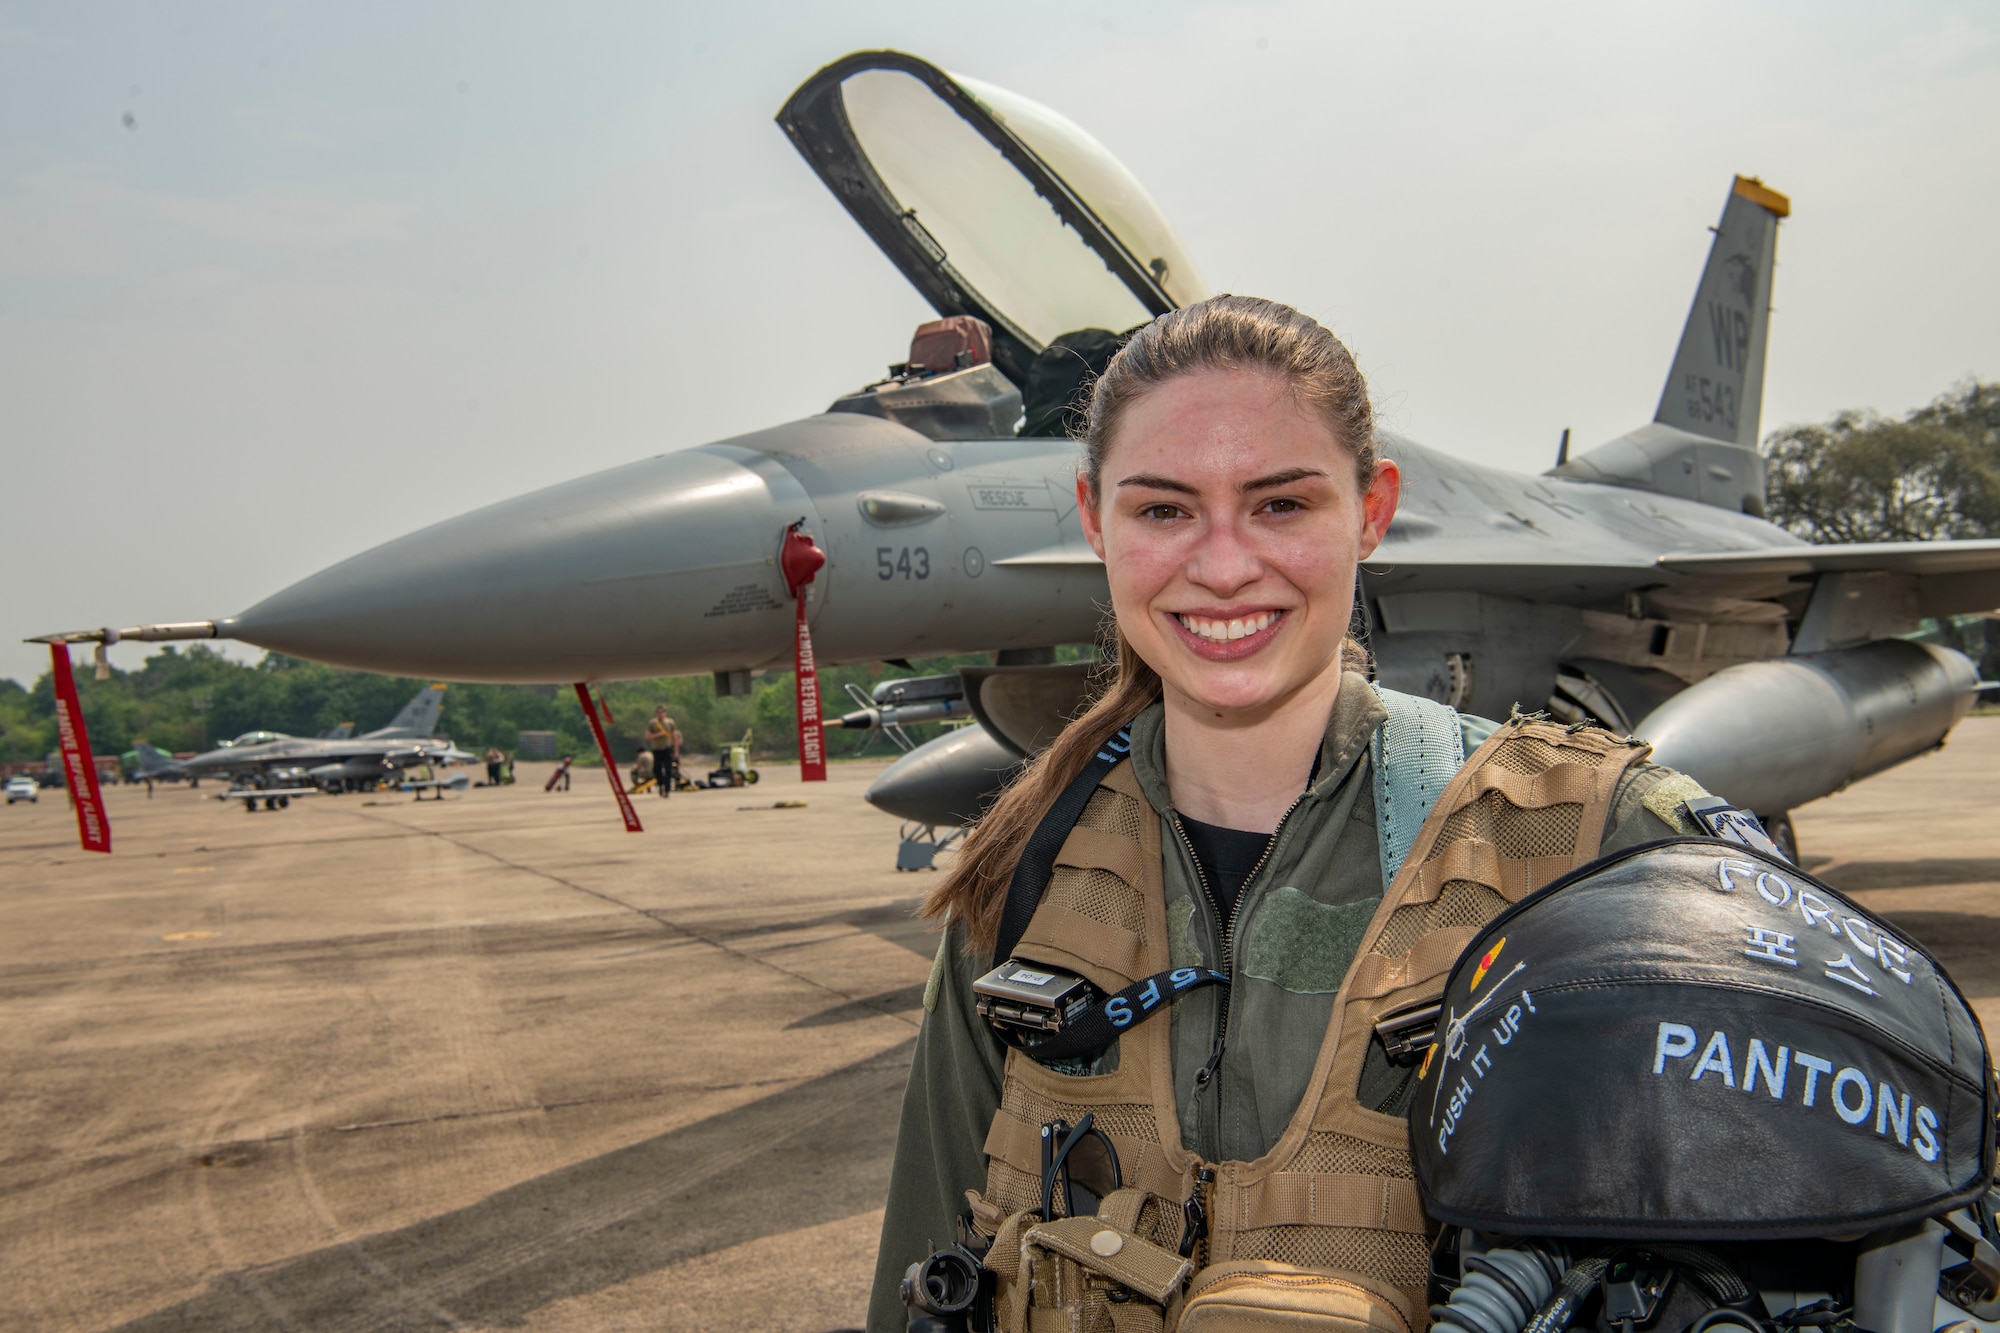 First Lt. Samantha “Force” Colombo, 35th Fighter Squadron pilot, stands in front of an F-16 Fighting Falcon after returning from a flight during Cope Tiger 2022 at Korat Royal Thai Air Base, Thailand, March 18, 2022. Female fighter pilots officially started flying for the U.S. Air Force in the 1990s. (U.S. Air Force photo by Staff Sgt. Jesenia Landaverde)